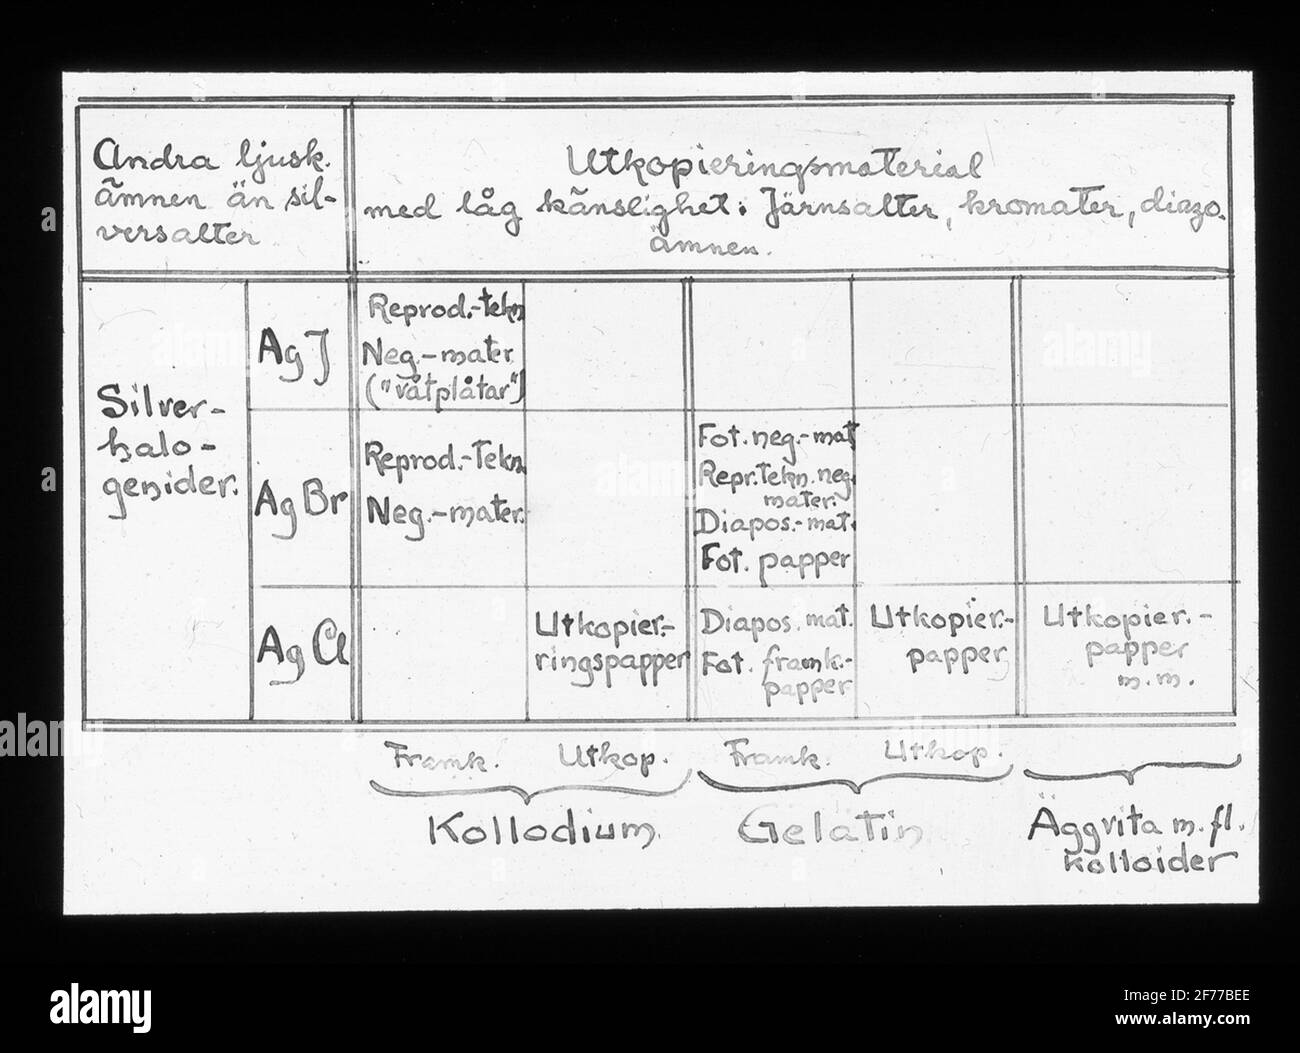 Skiopticon image from the Department of Photography at the Royal Institute of Technology. Use by Professor Helmer Bäckström as lecture material. Bäckström was Sweden's first professor in photography at the Royal Institute of Technology in Stockholm 1948-1958.Table over different types of photosensitive material.For more info See: Bäckström, Helmer. Photographic manual. Nature and Culture. Stockholm. 1942. p. 241. Stock Photo